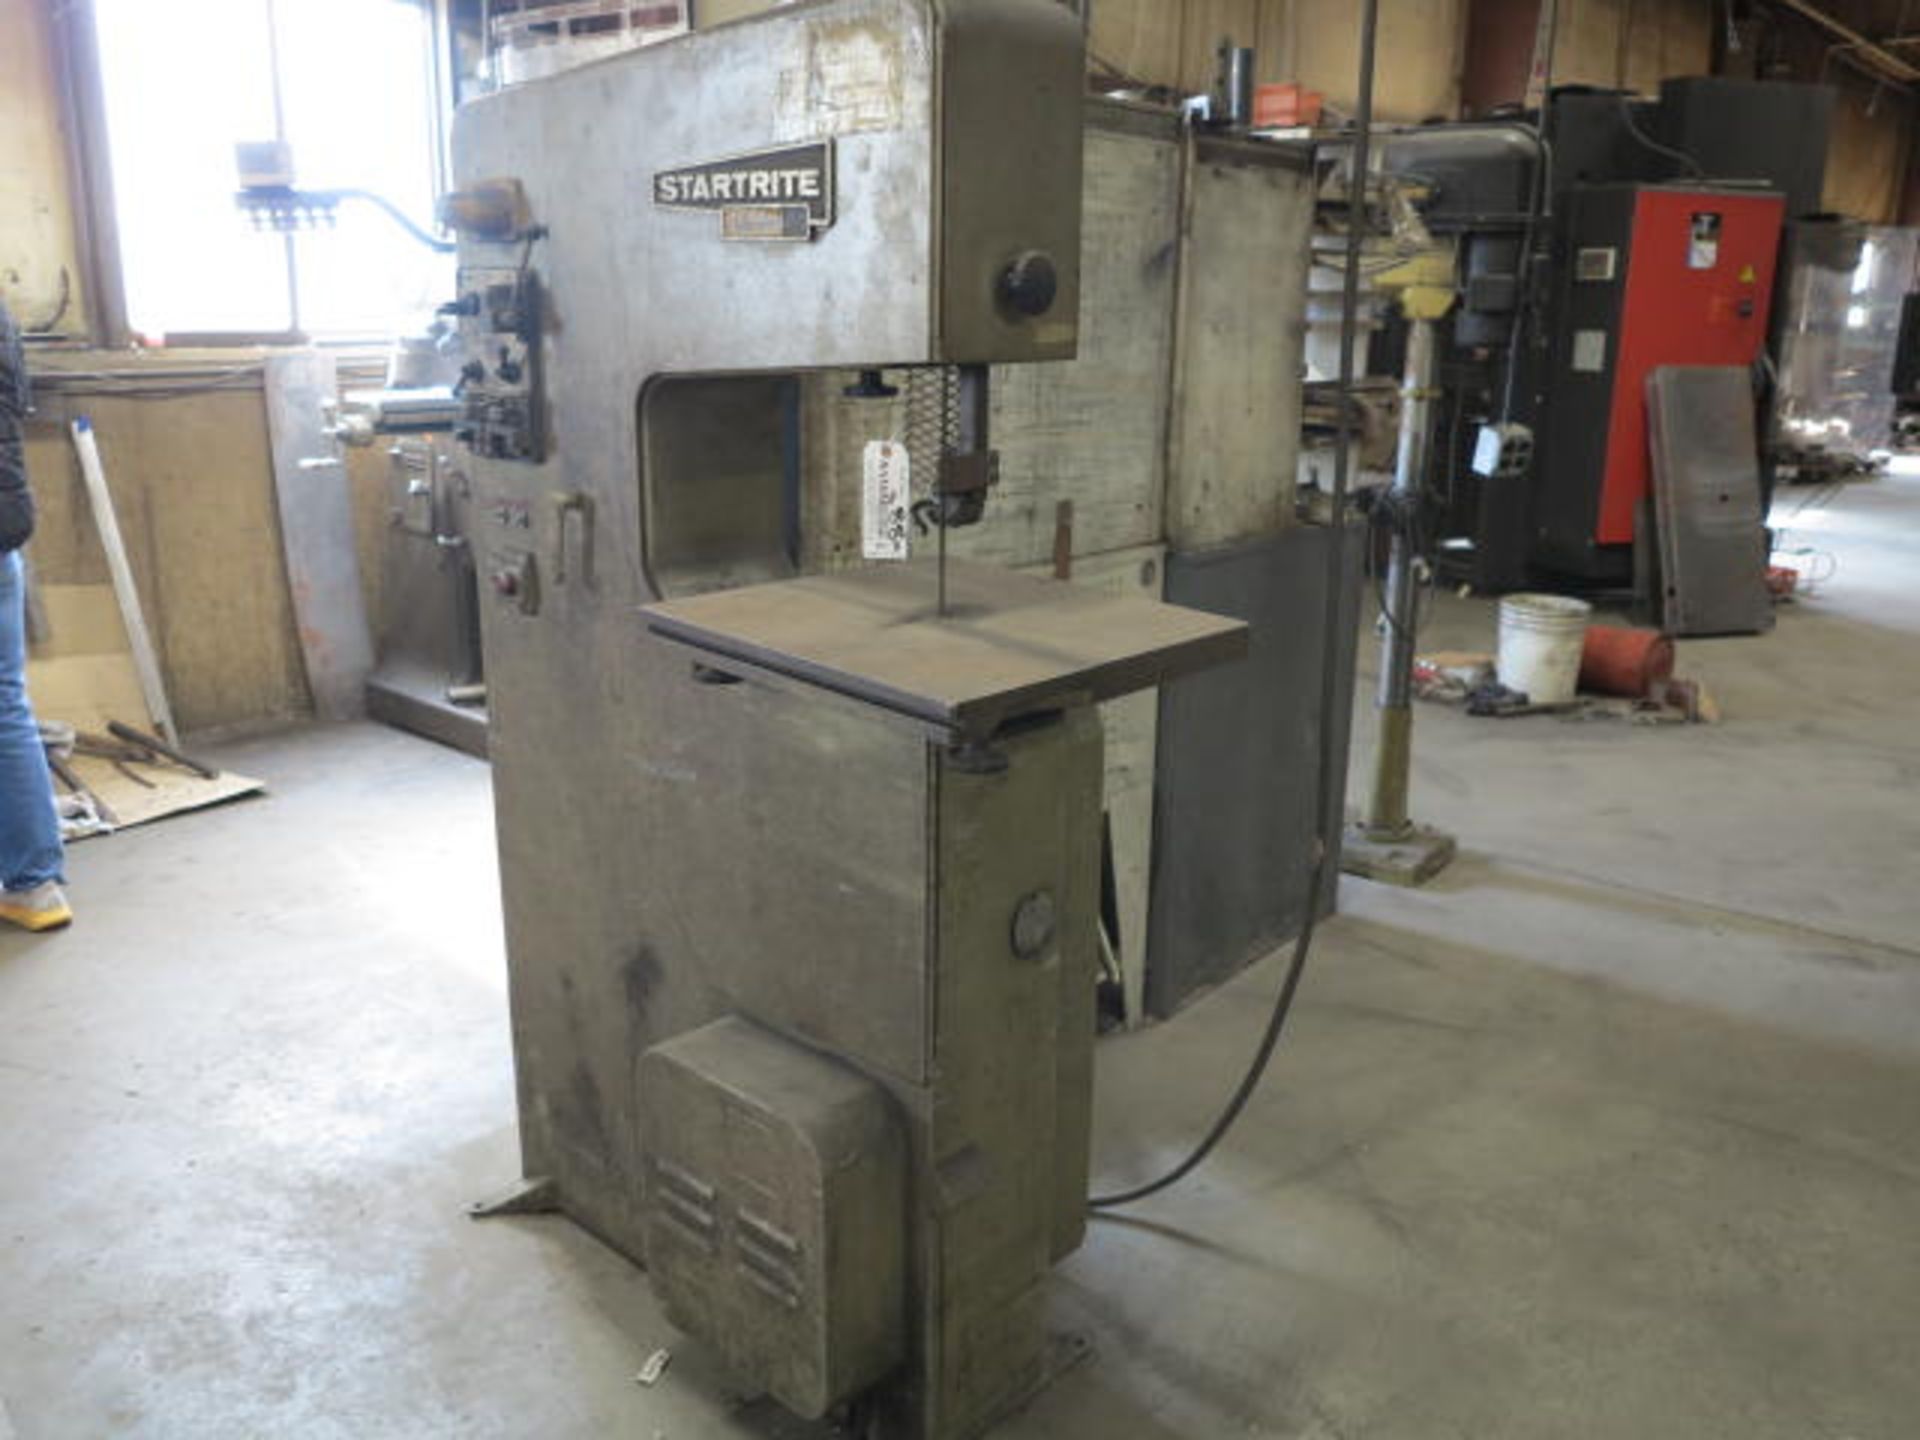 Startrite Model 18V10, S/N 24137 Vertical Band Saw with Welding Attachment Located 1432 GAR